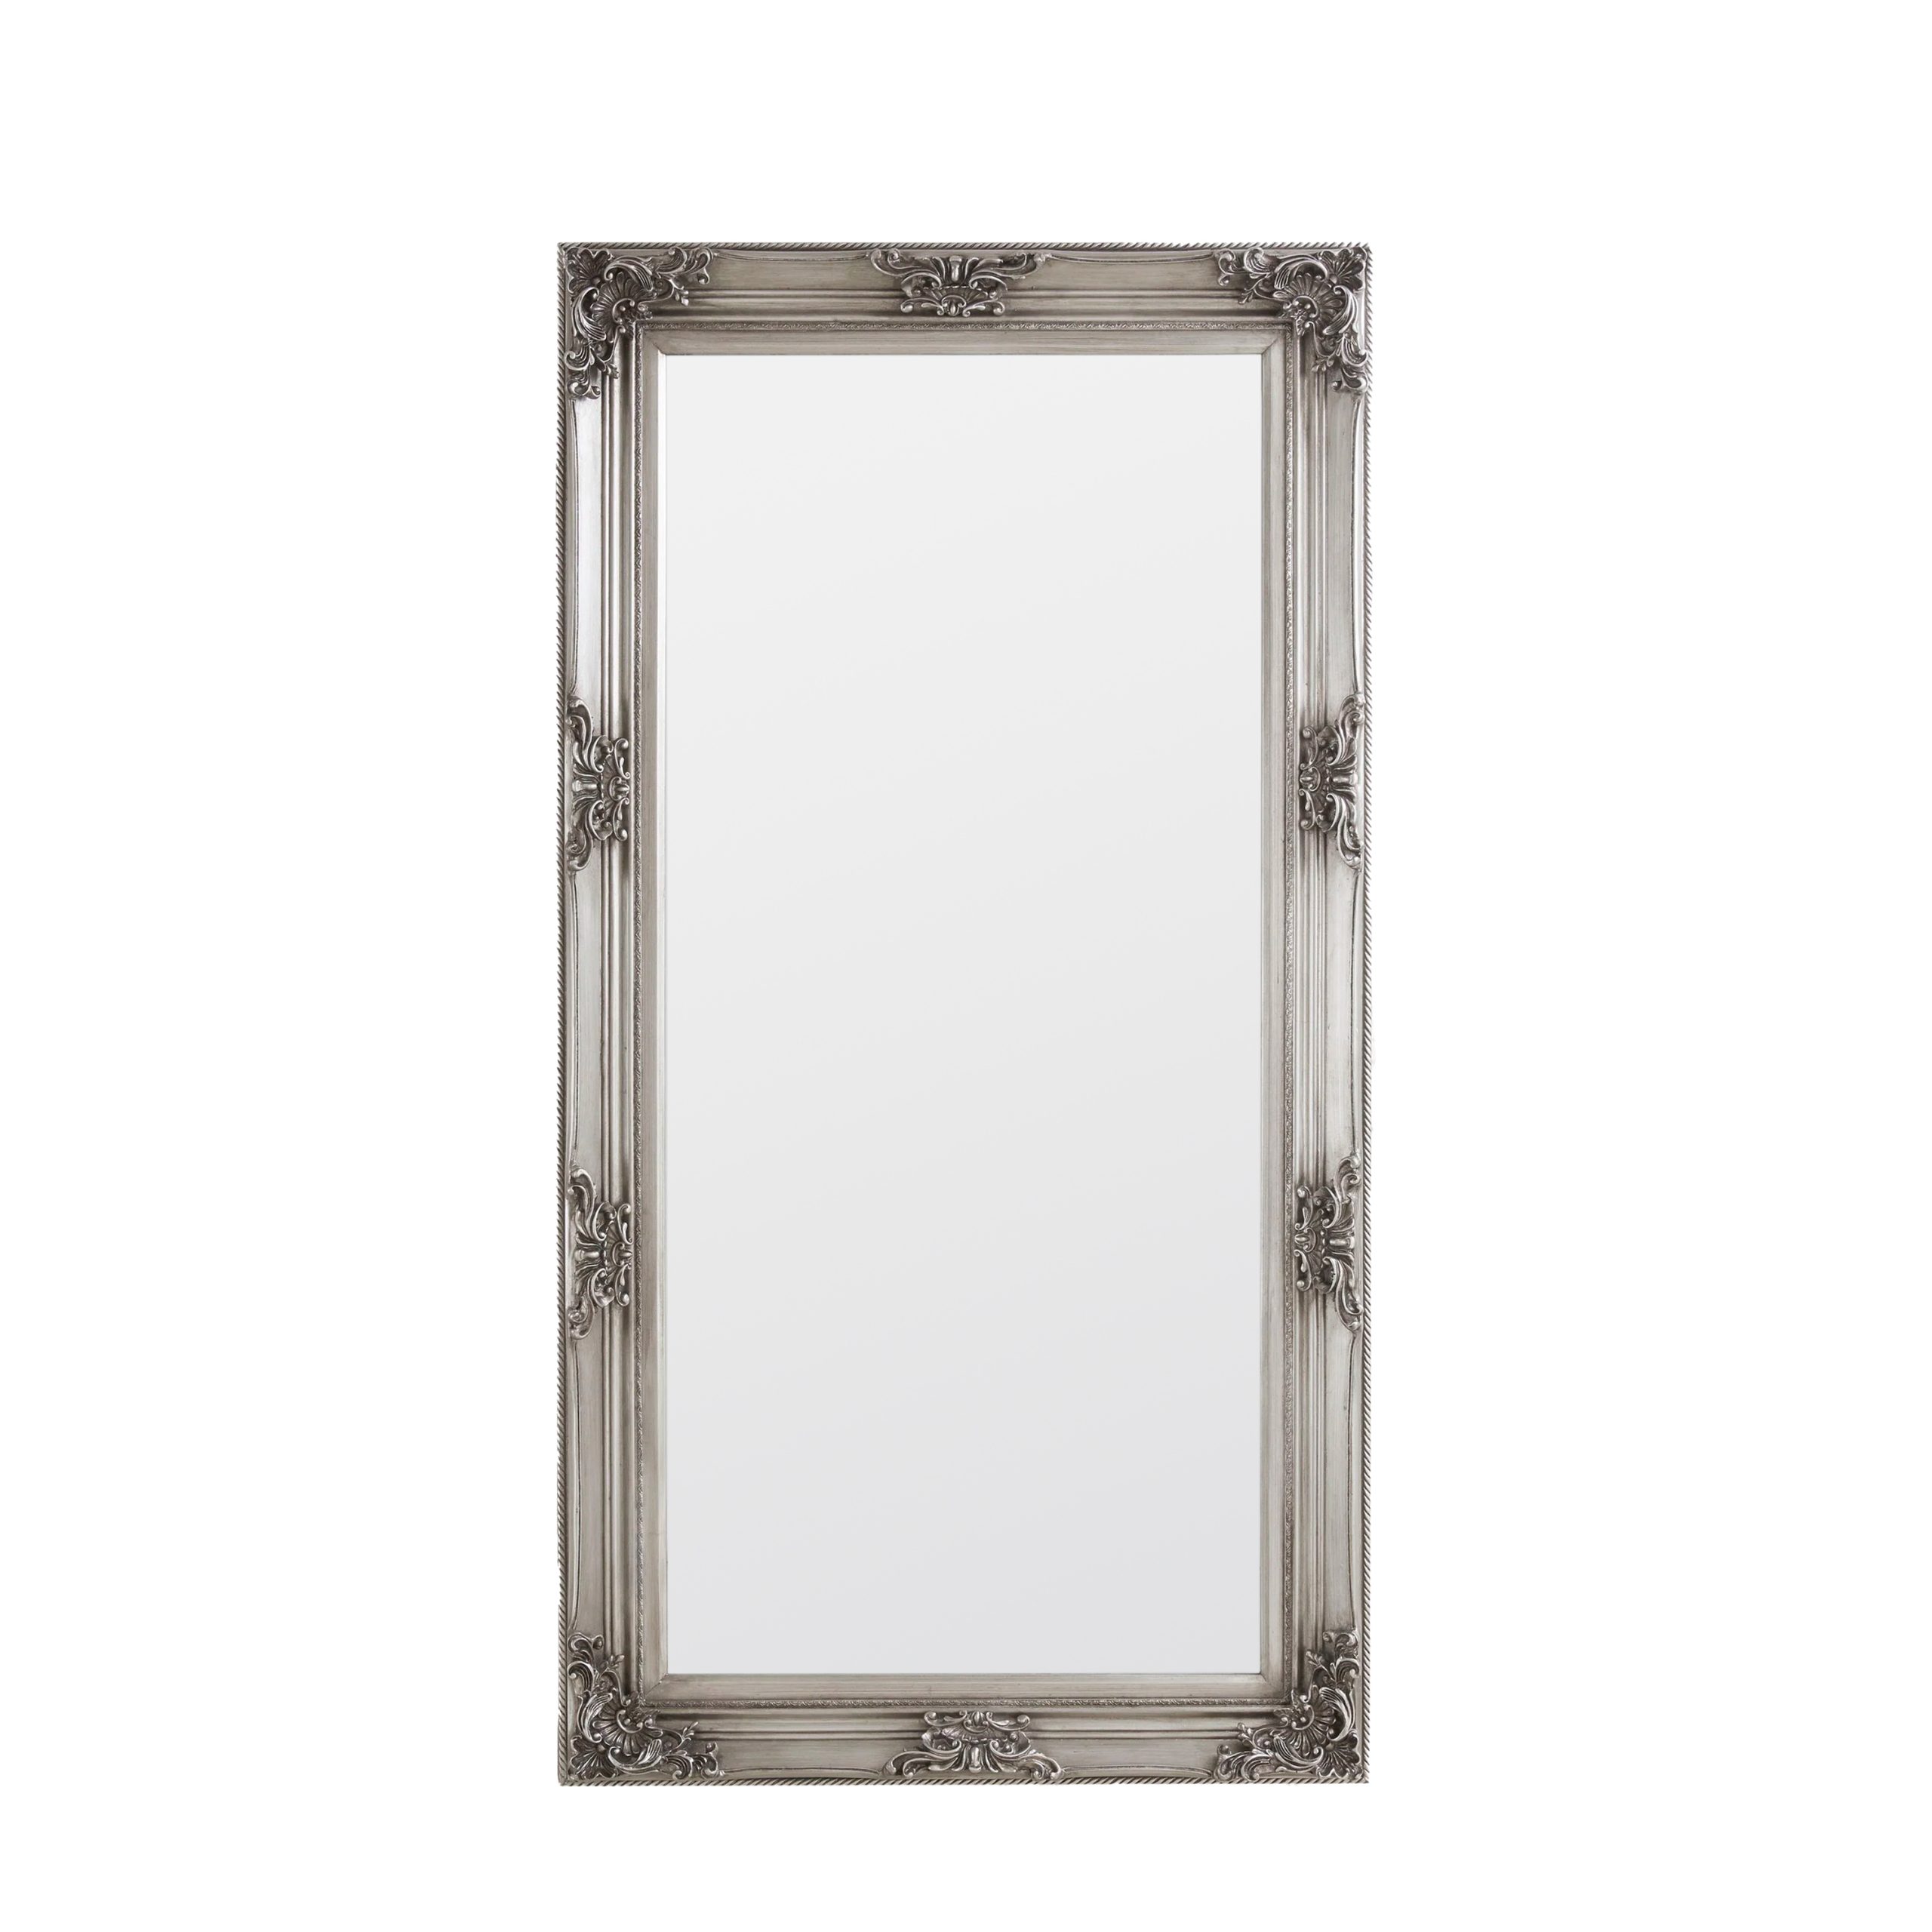 Gallery Direct Calcott Mirror Pewter | Shackletons